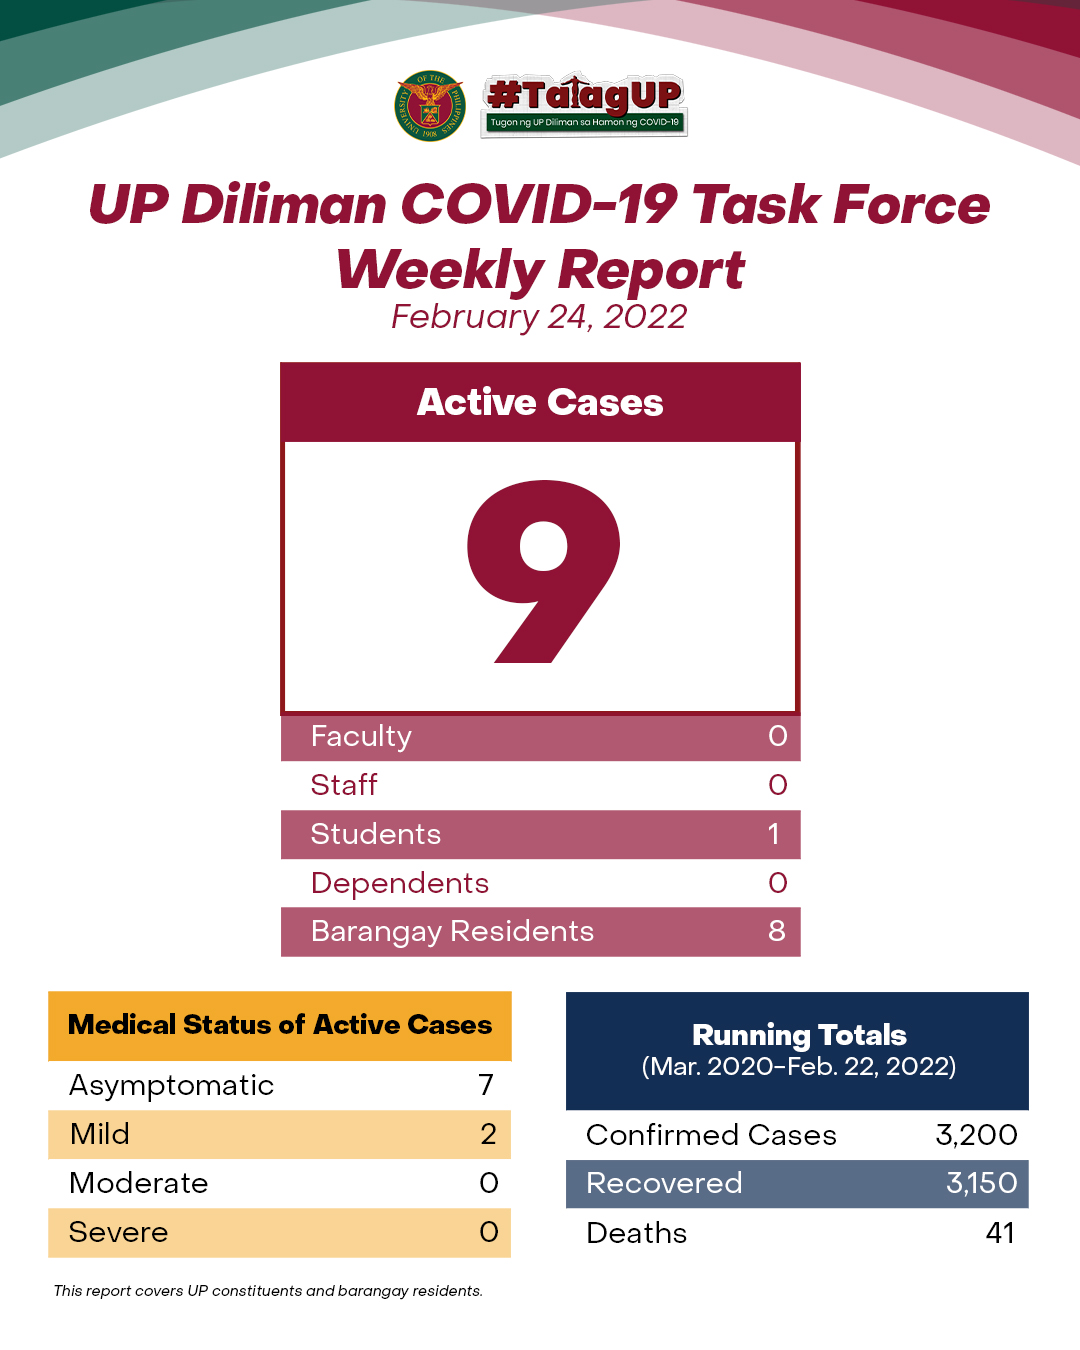 UP Diliman COVID-19 Task Force Weekly Report (February 24, 2022)